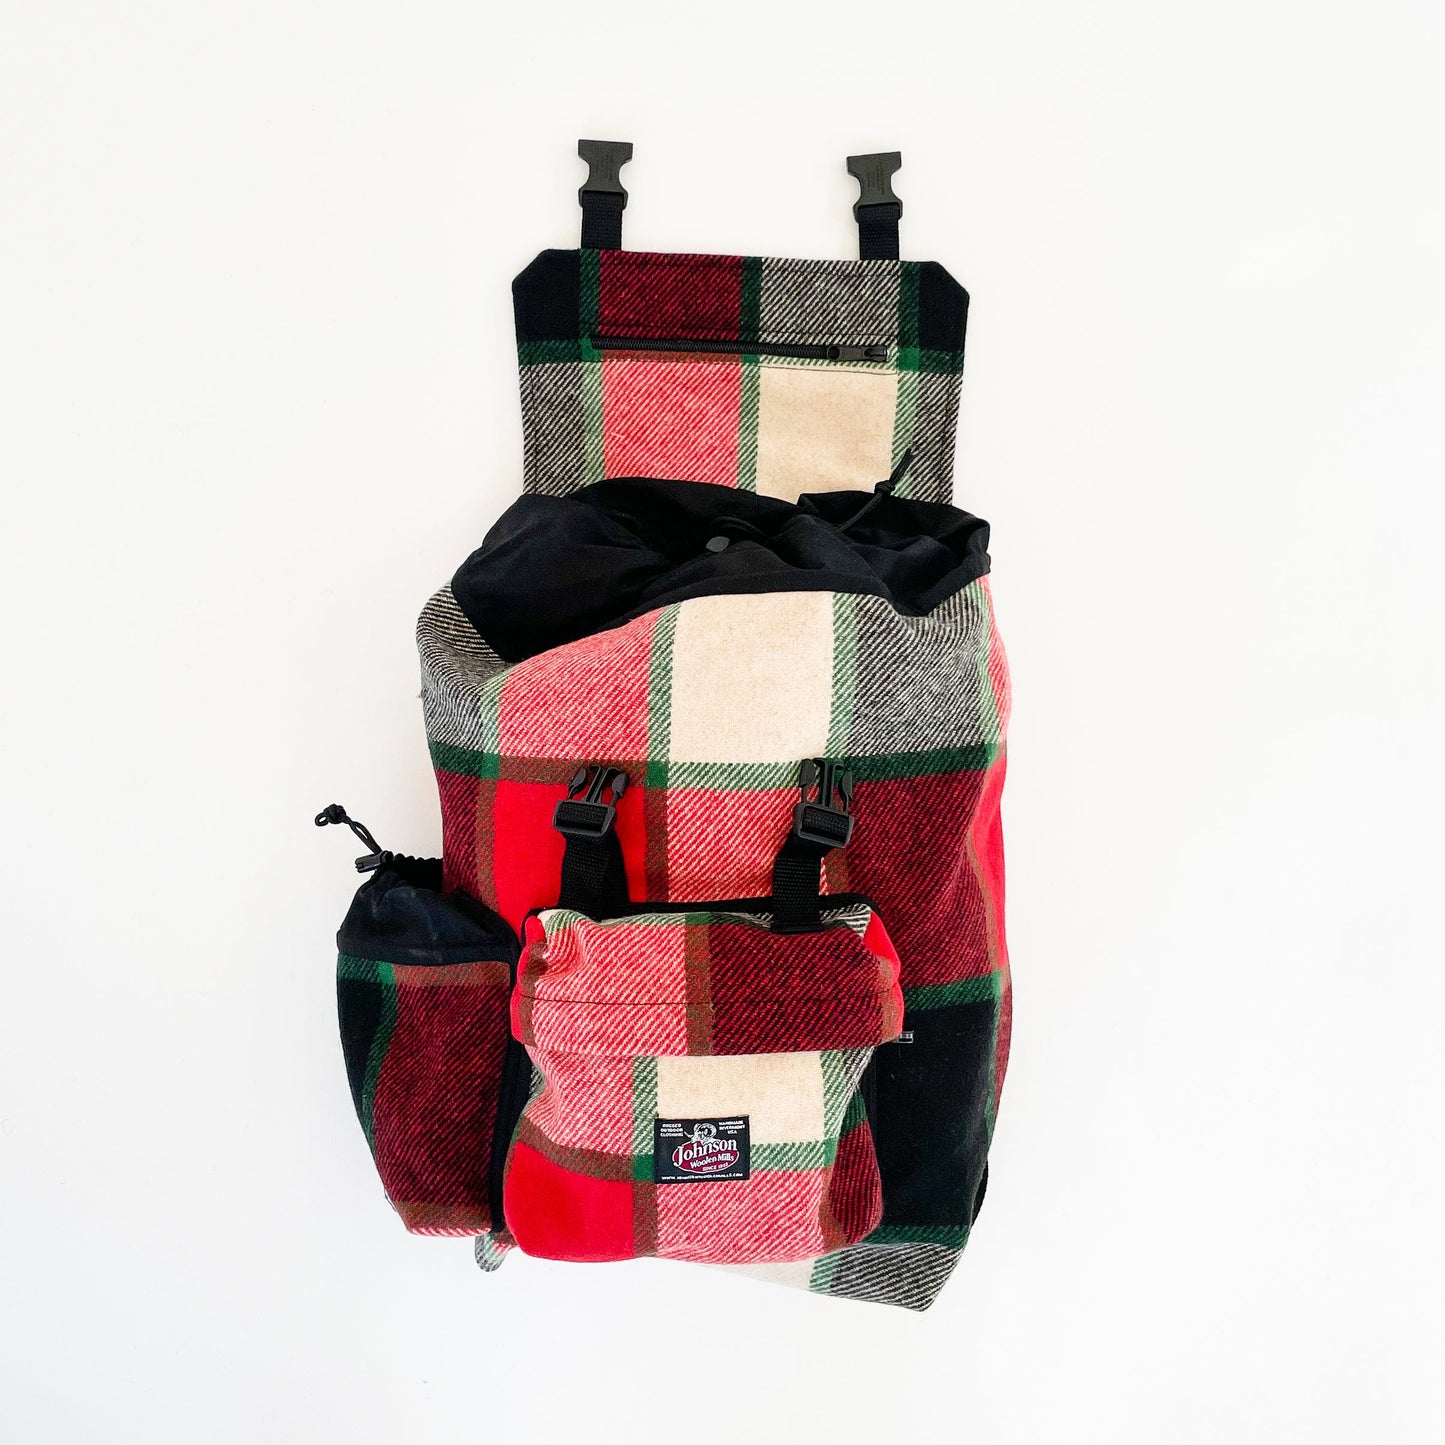 Johnson Woolen Mills Daypack Canadian Plaid Red/Pink/Green/White/ front view  with water bottle in side pocket